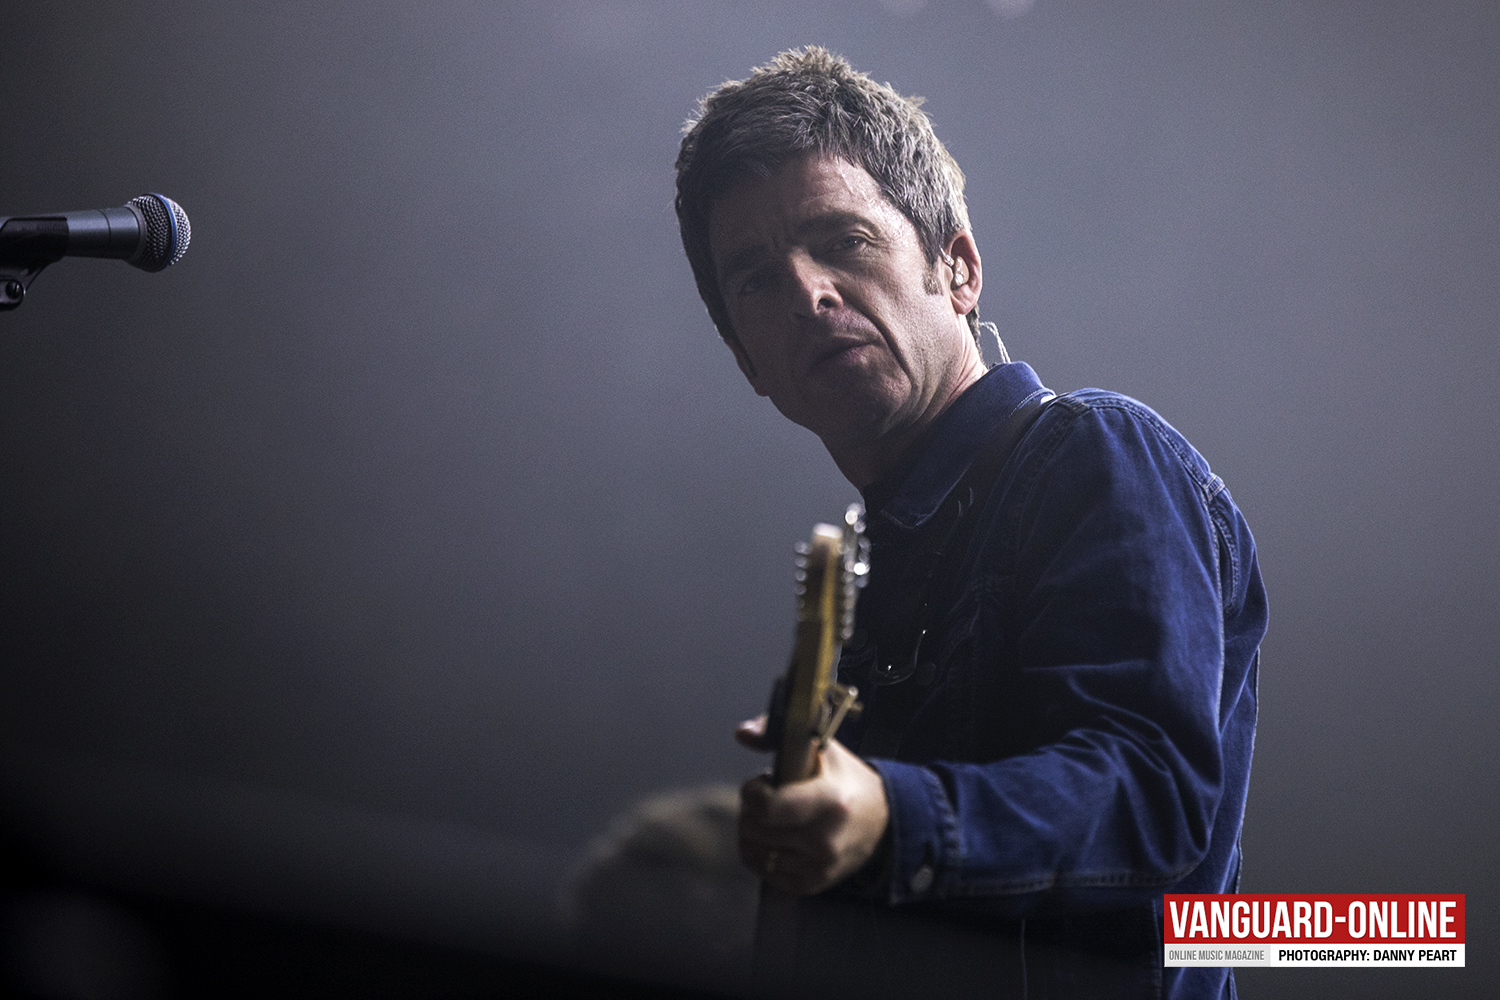 Noel_Gallagher_DANNY_PEART_VO